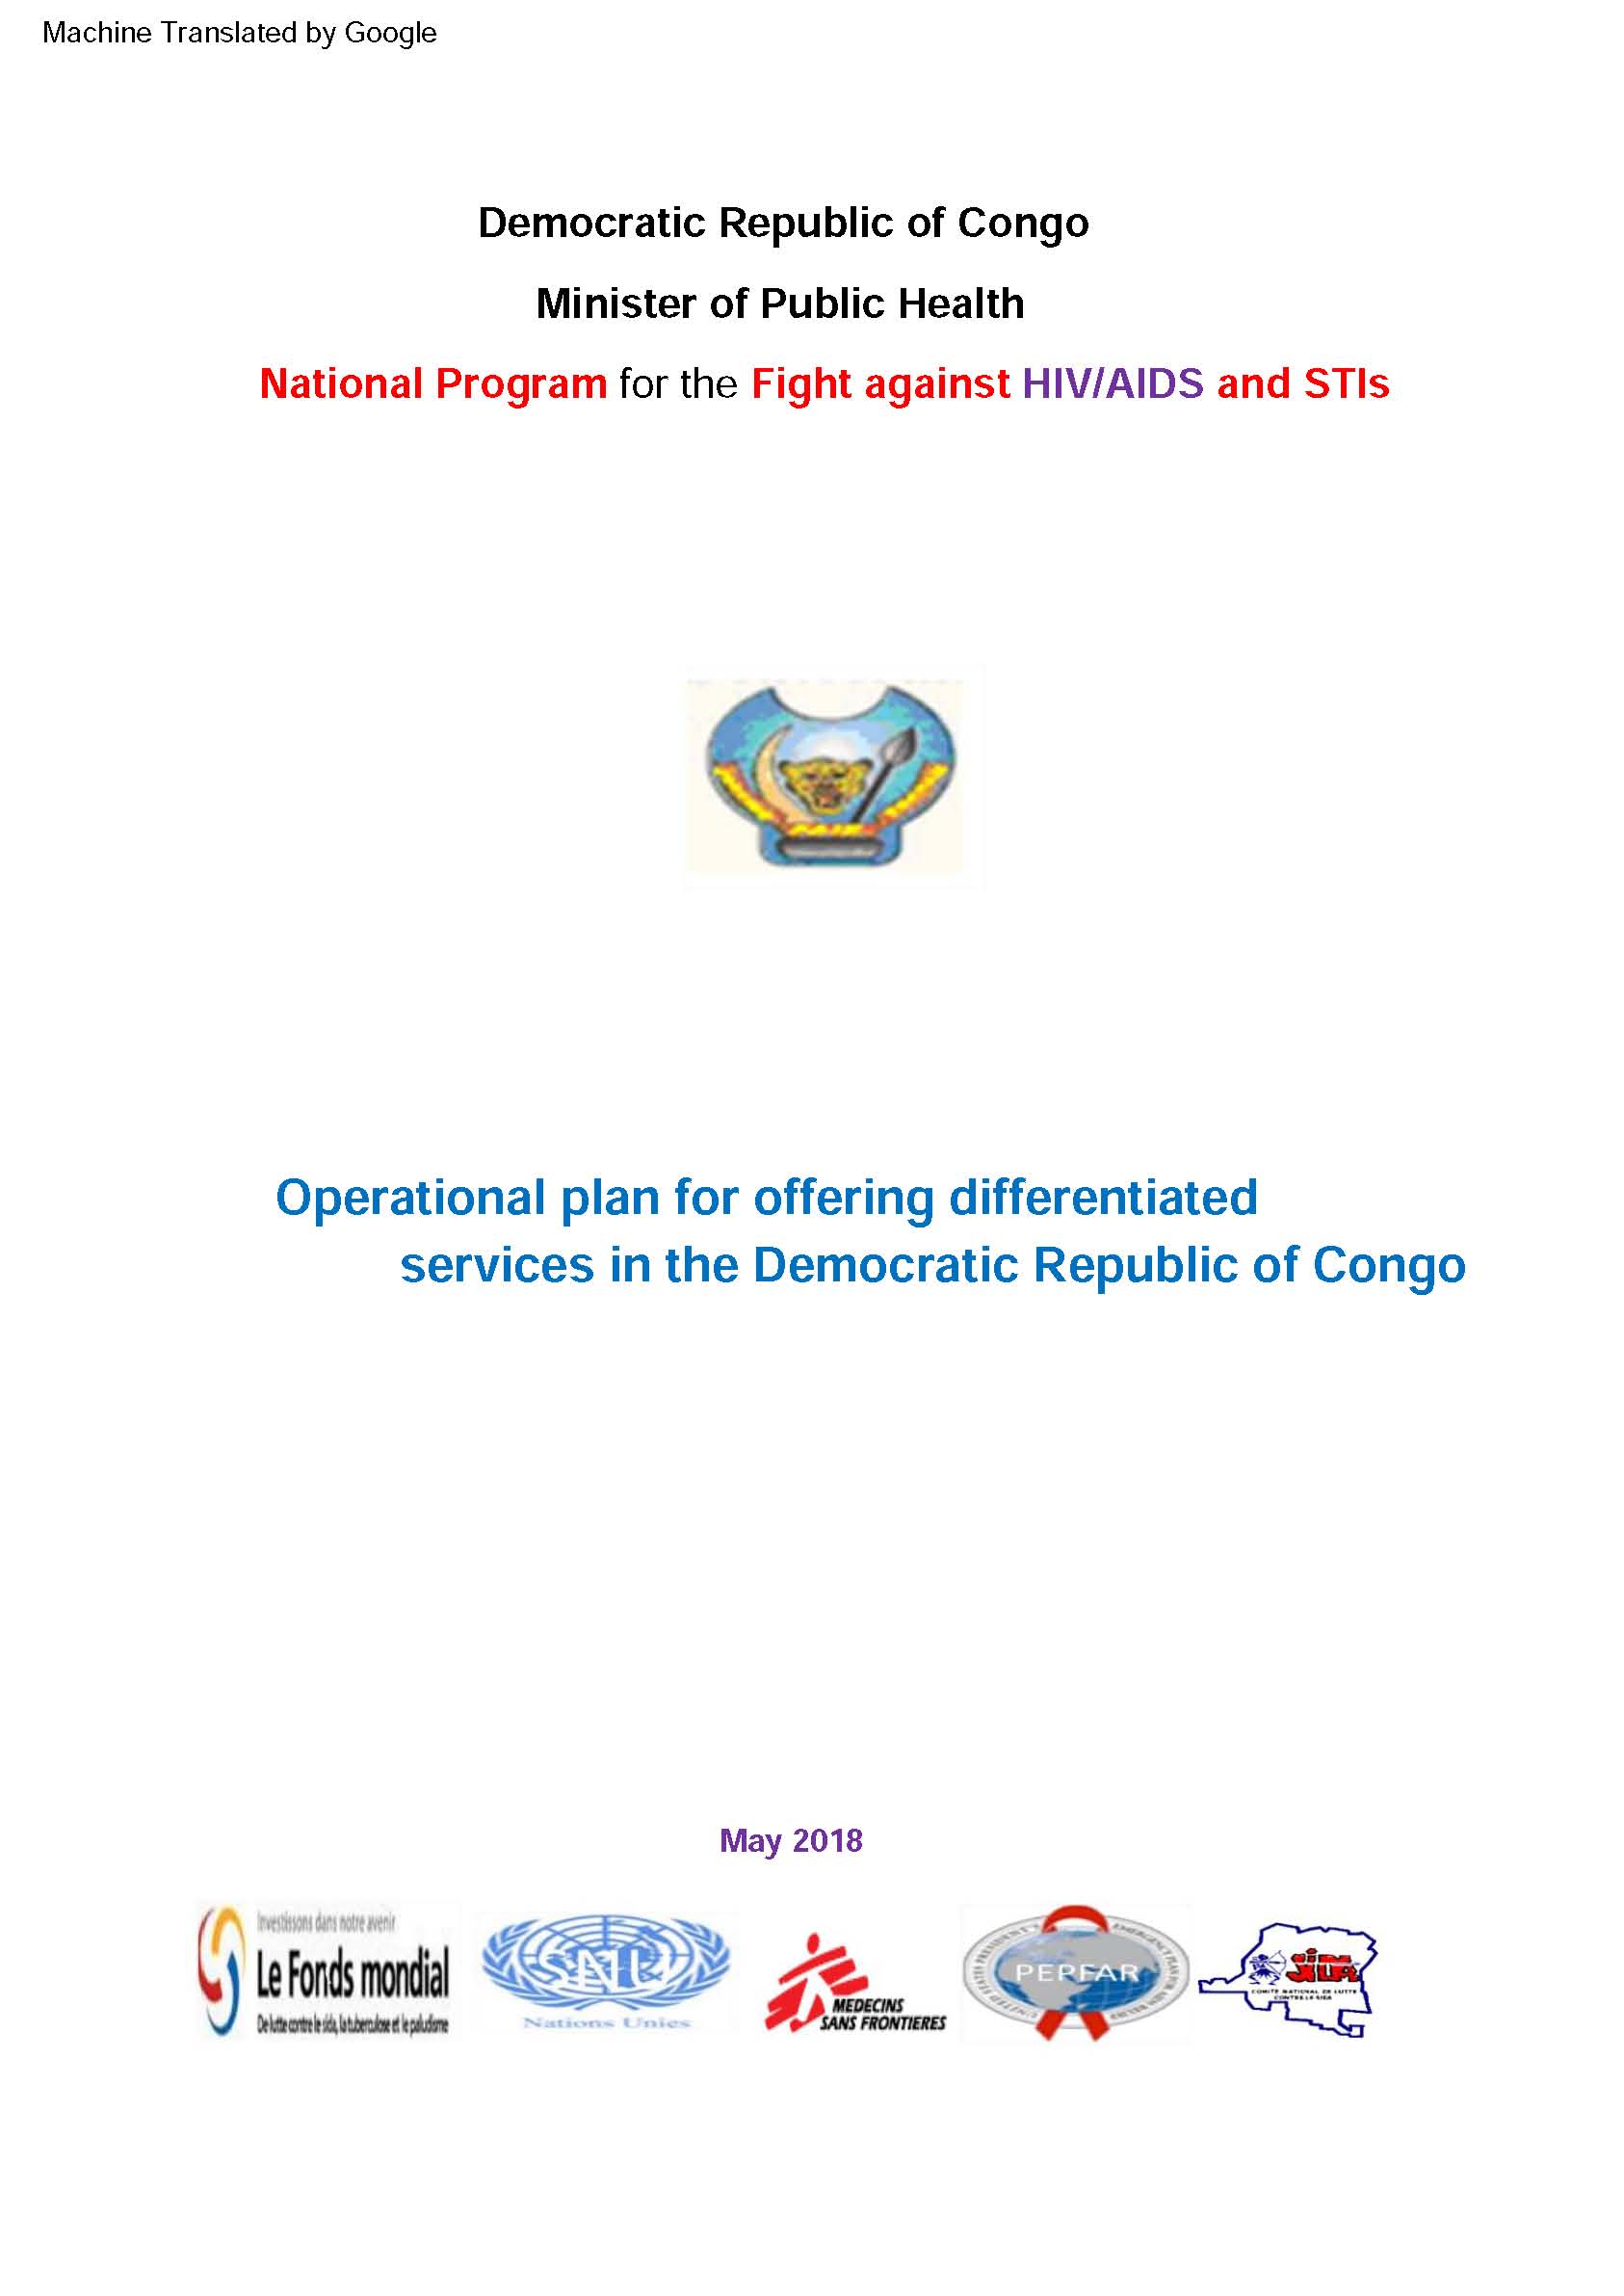 Operational plan for offering differentiated services in the Democratic Republic of Congo